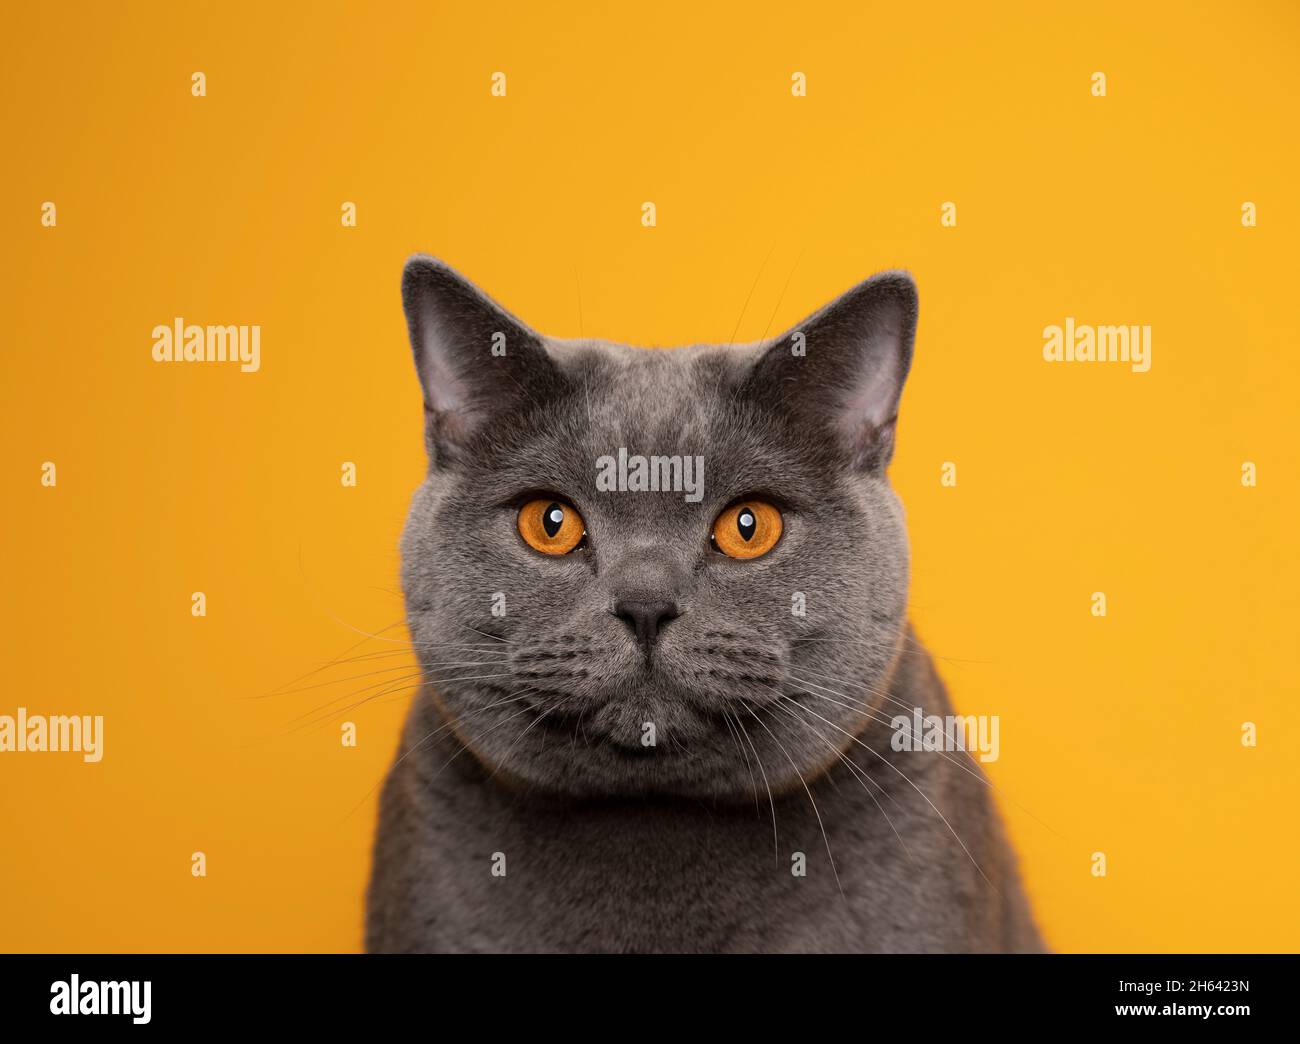 blue british shorthair cat with orange eyes looking at camera on yellow background portrait Stock Photo